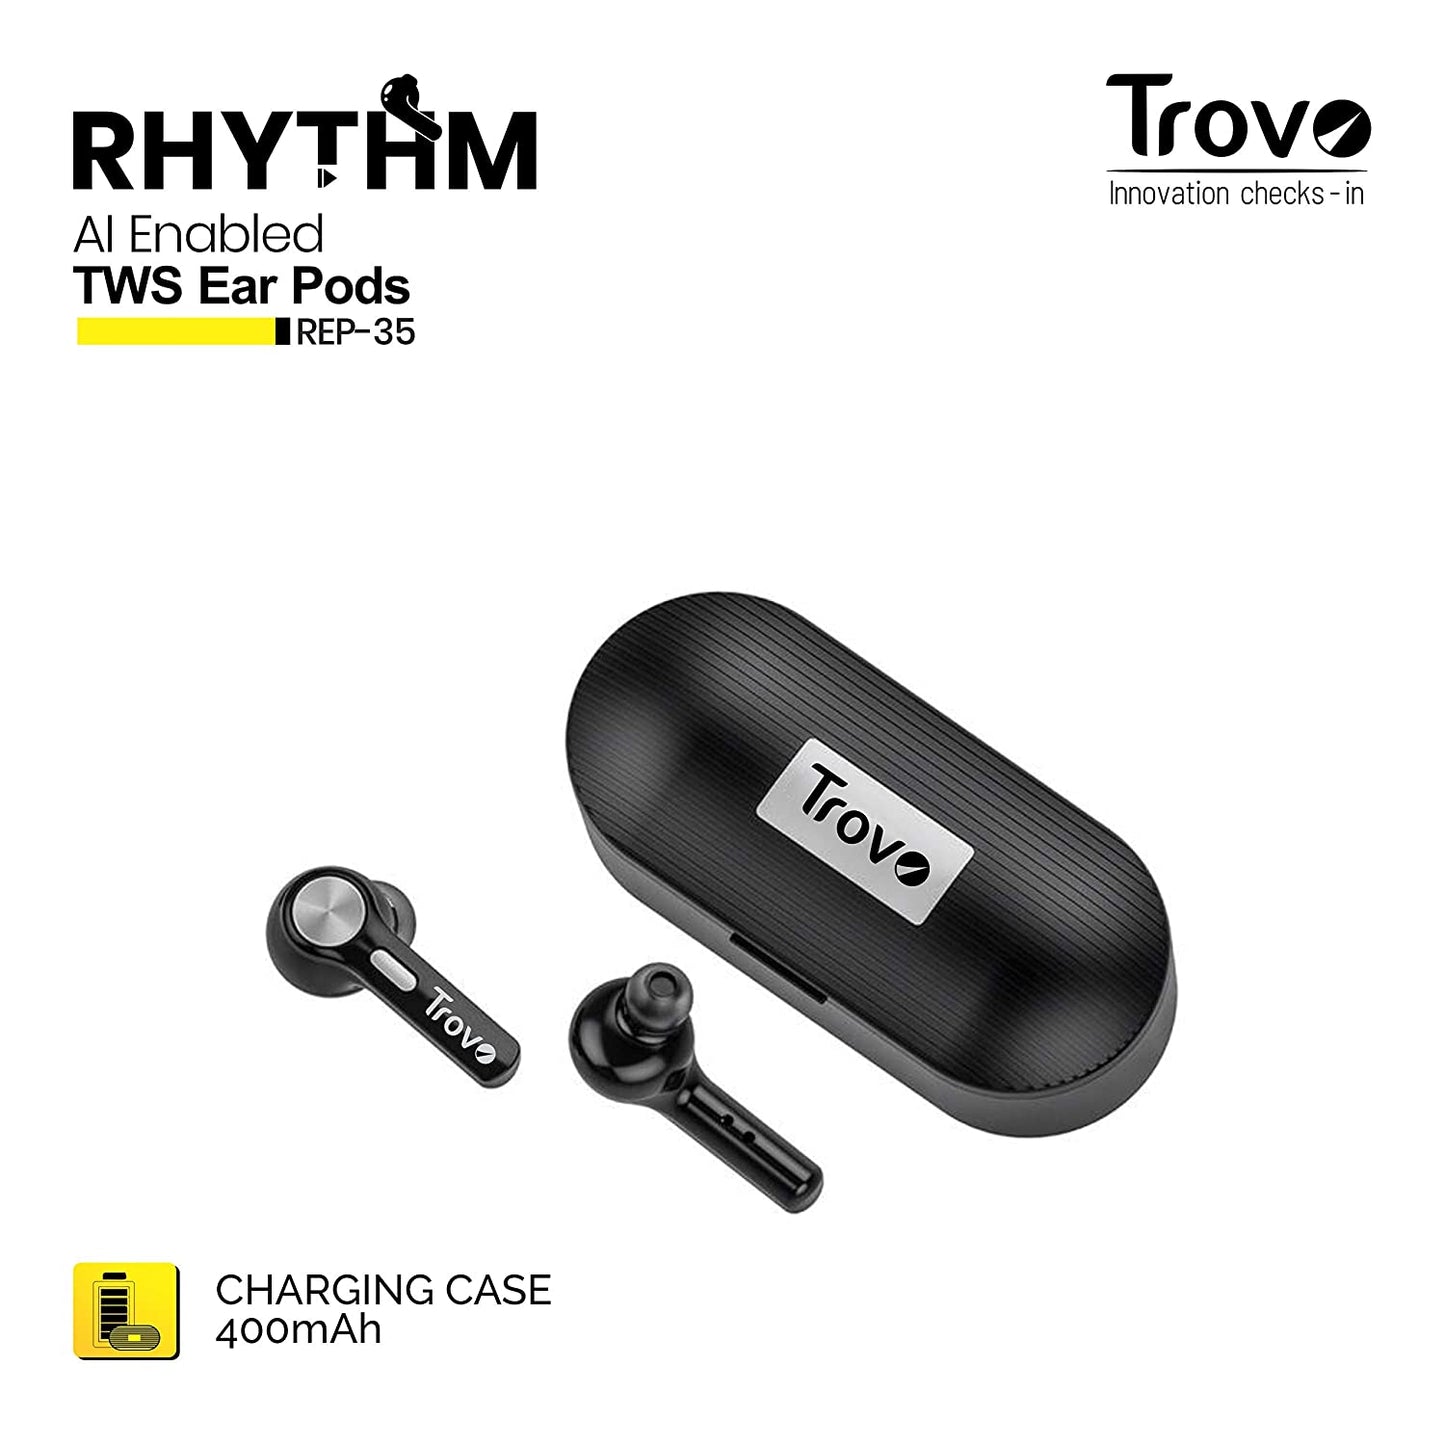 REP-35 Rhythm True Wireless Voice Assistant Bluetooth Headset with Mic & Charging Box (Black)